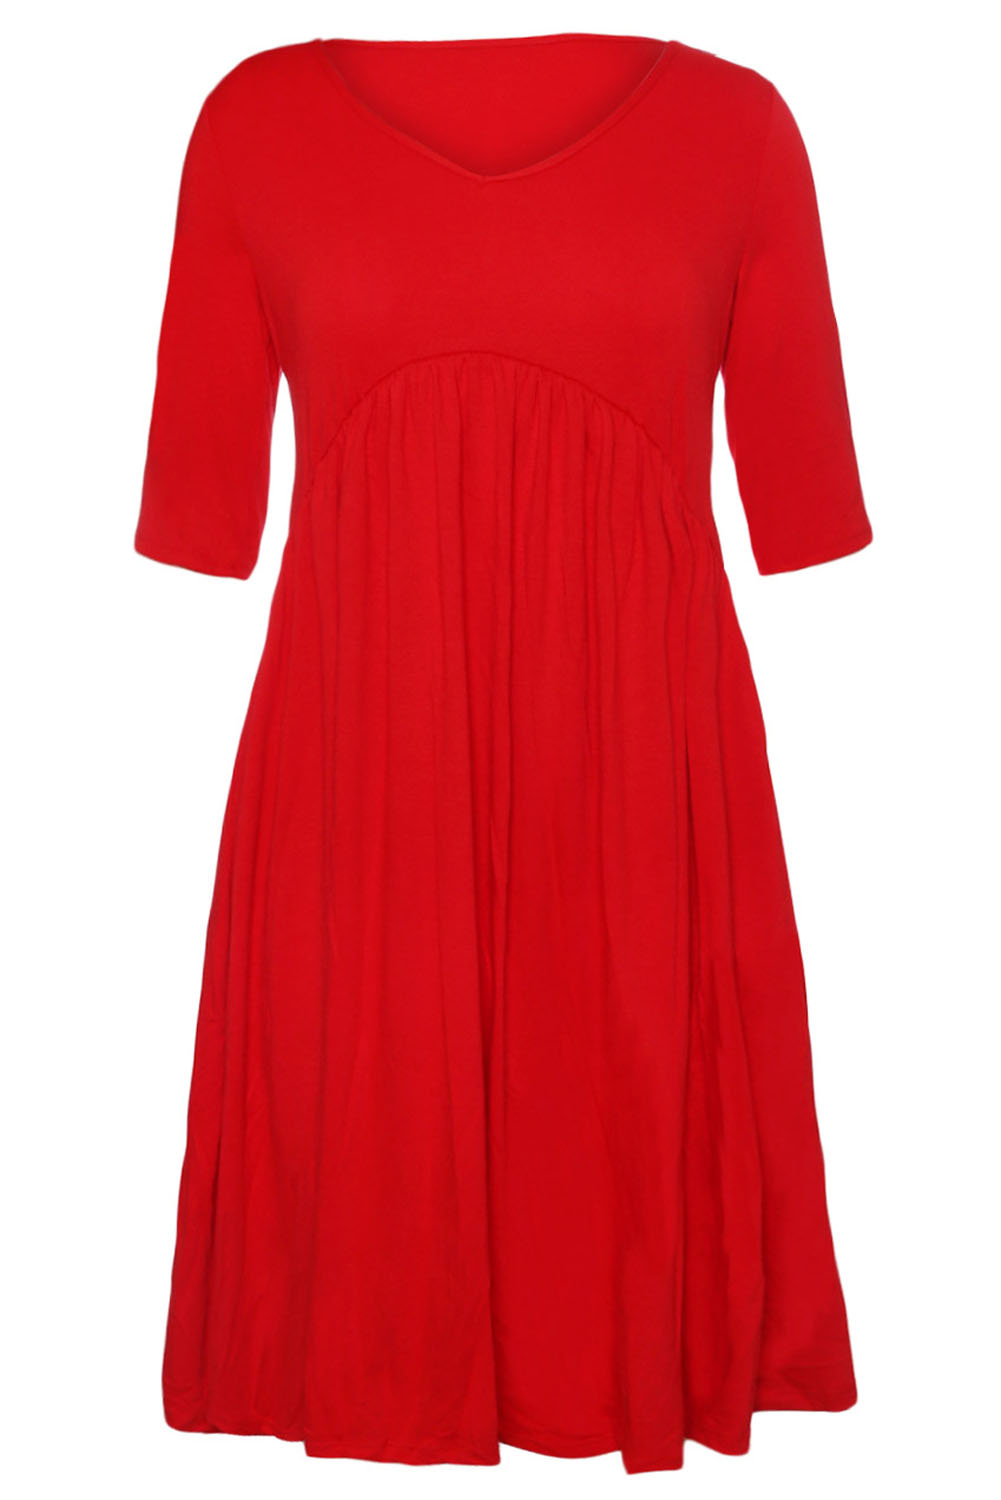 BY61653-3 Red Sleeve Draped Swing Dress